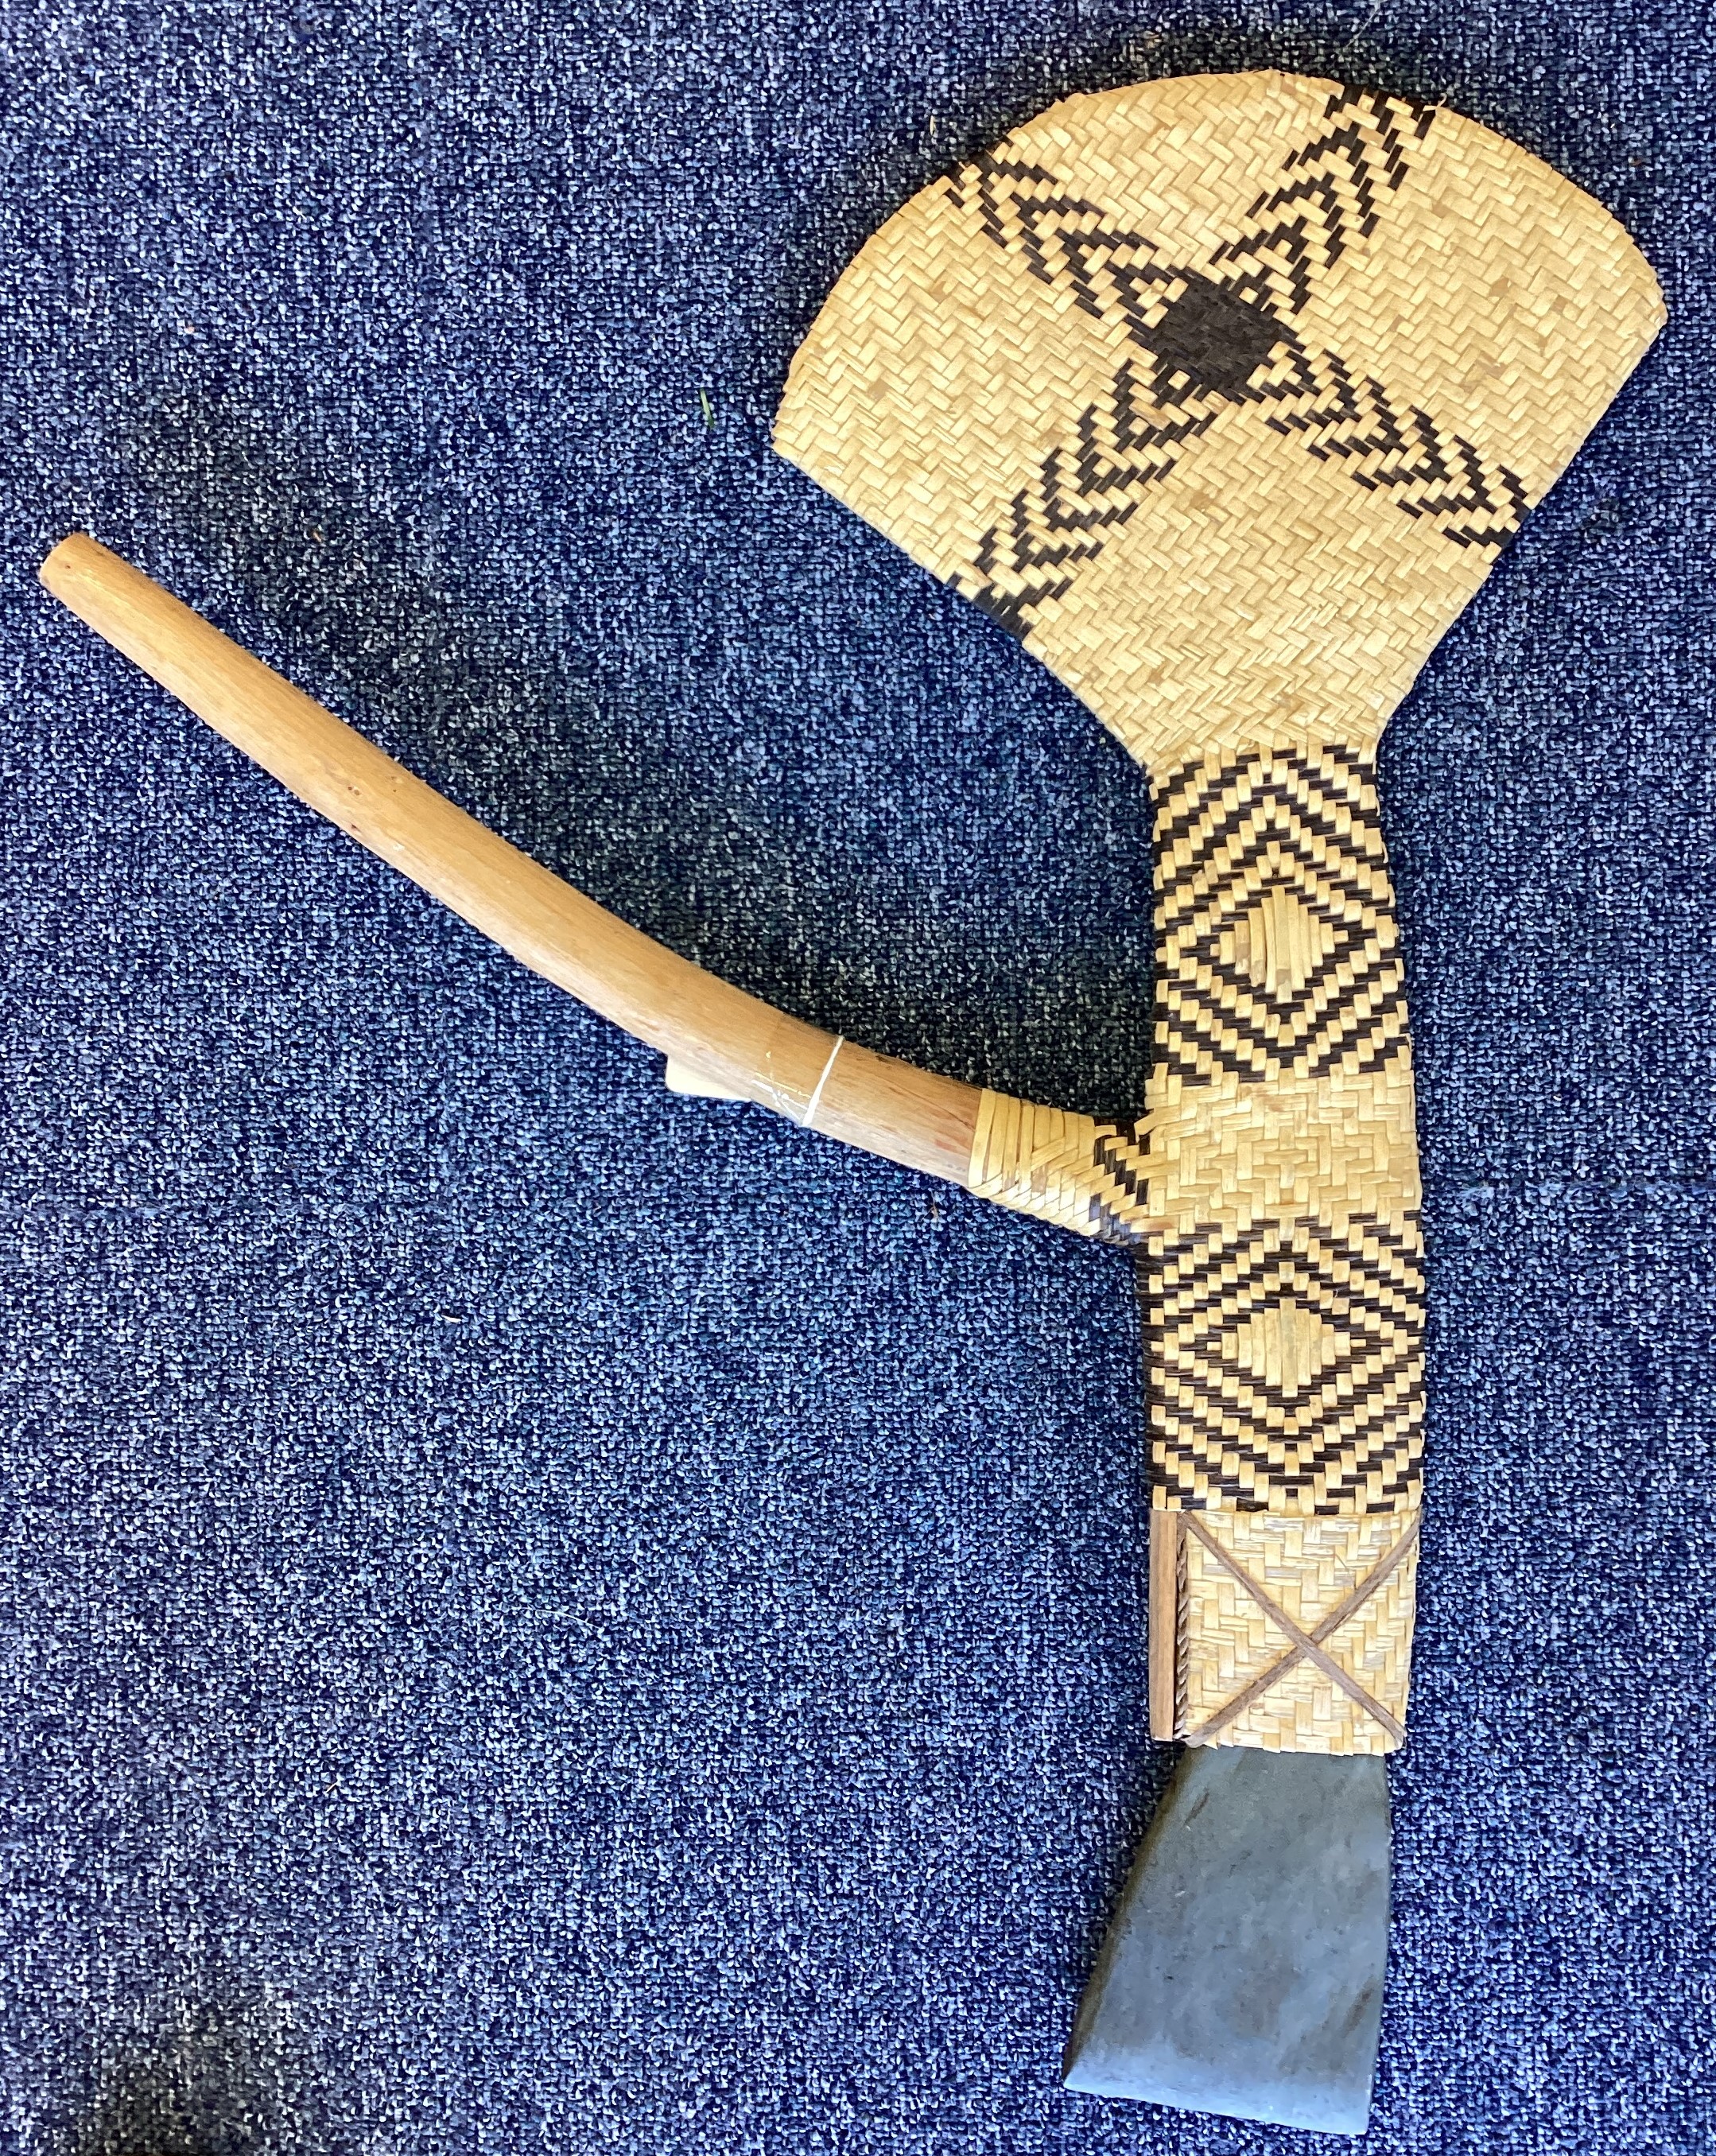 An unusual Papua New Guinea axe. - Image 2 of 2